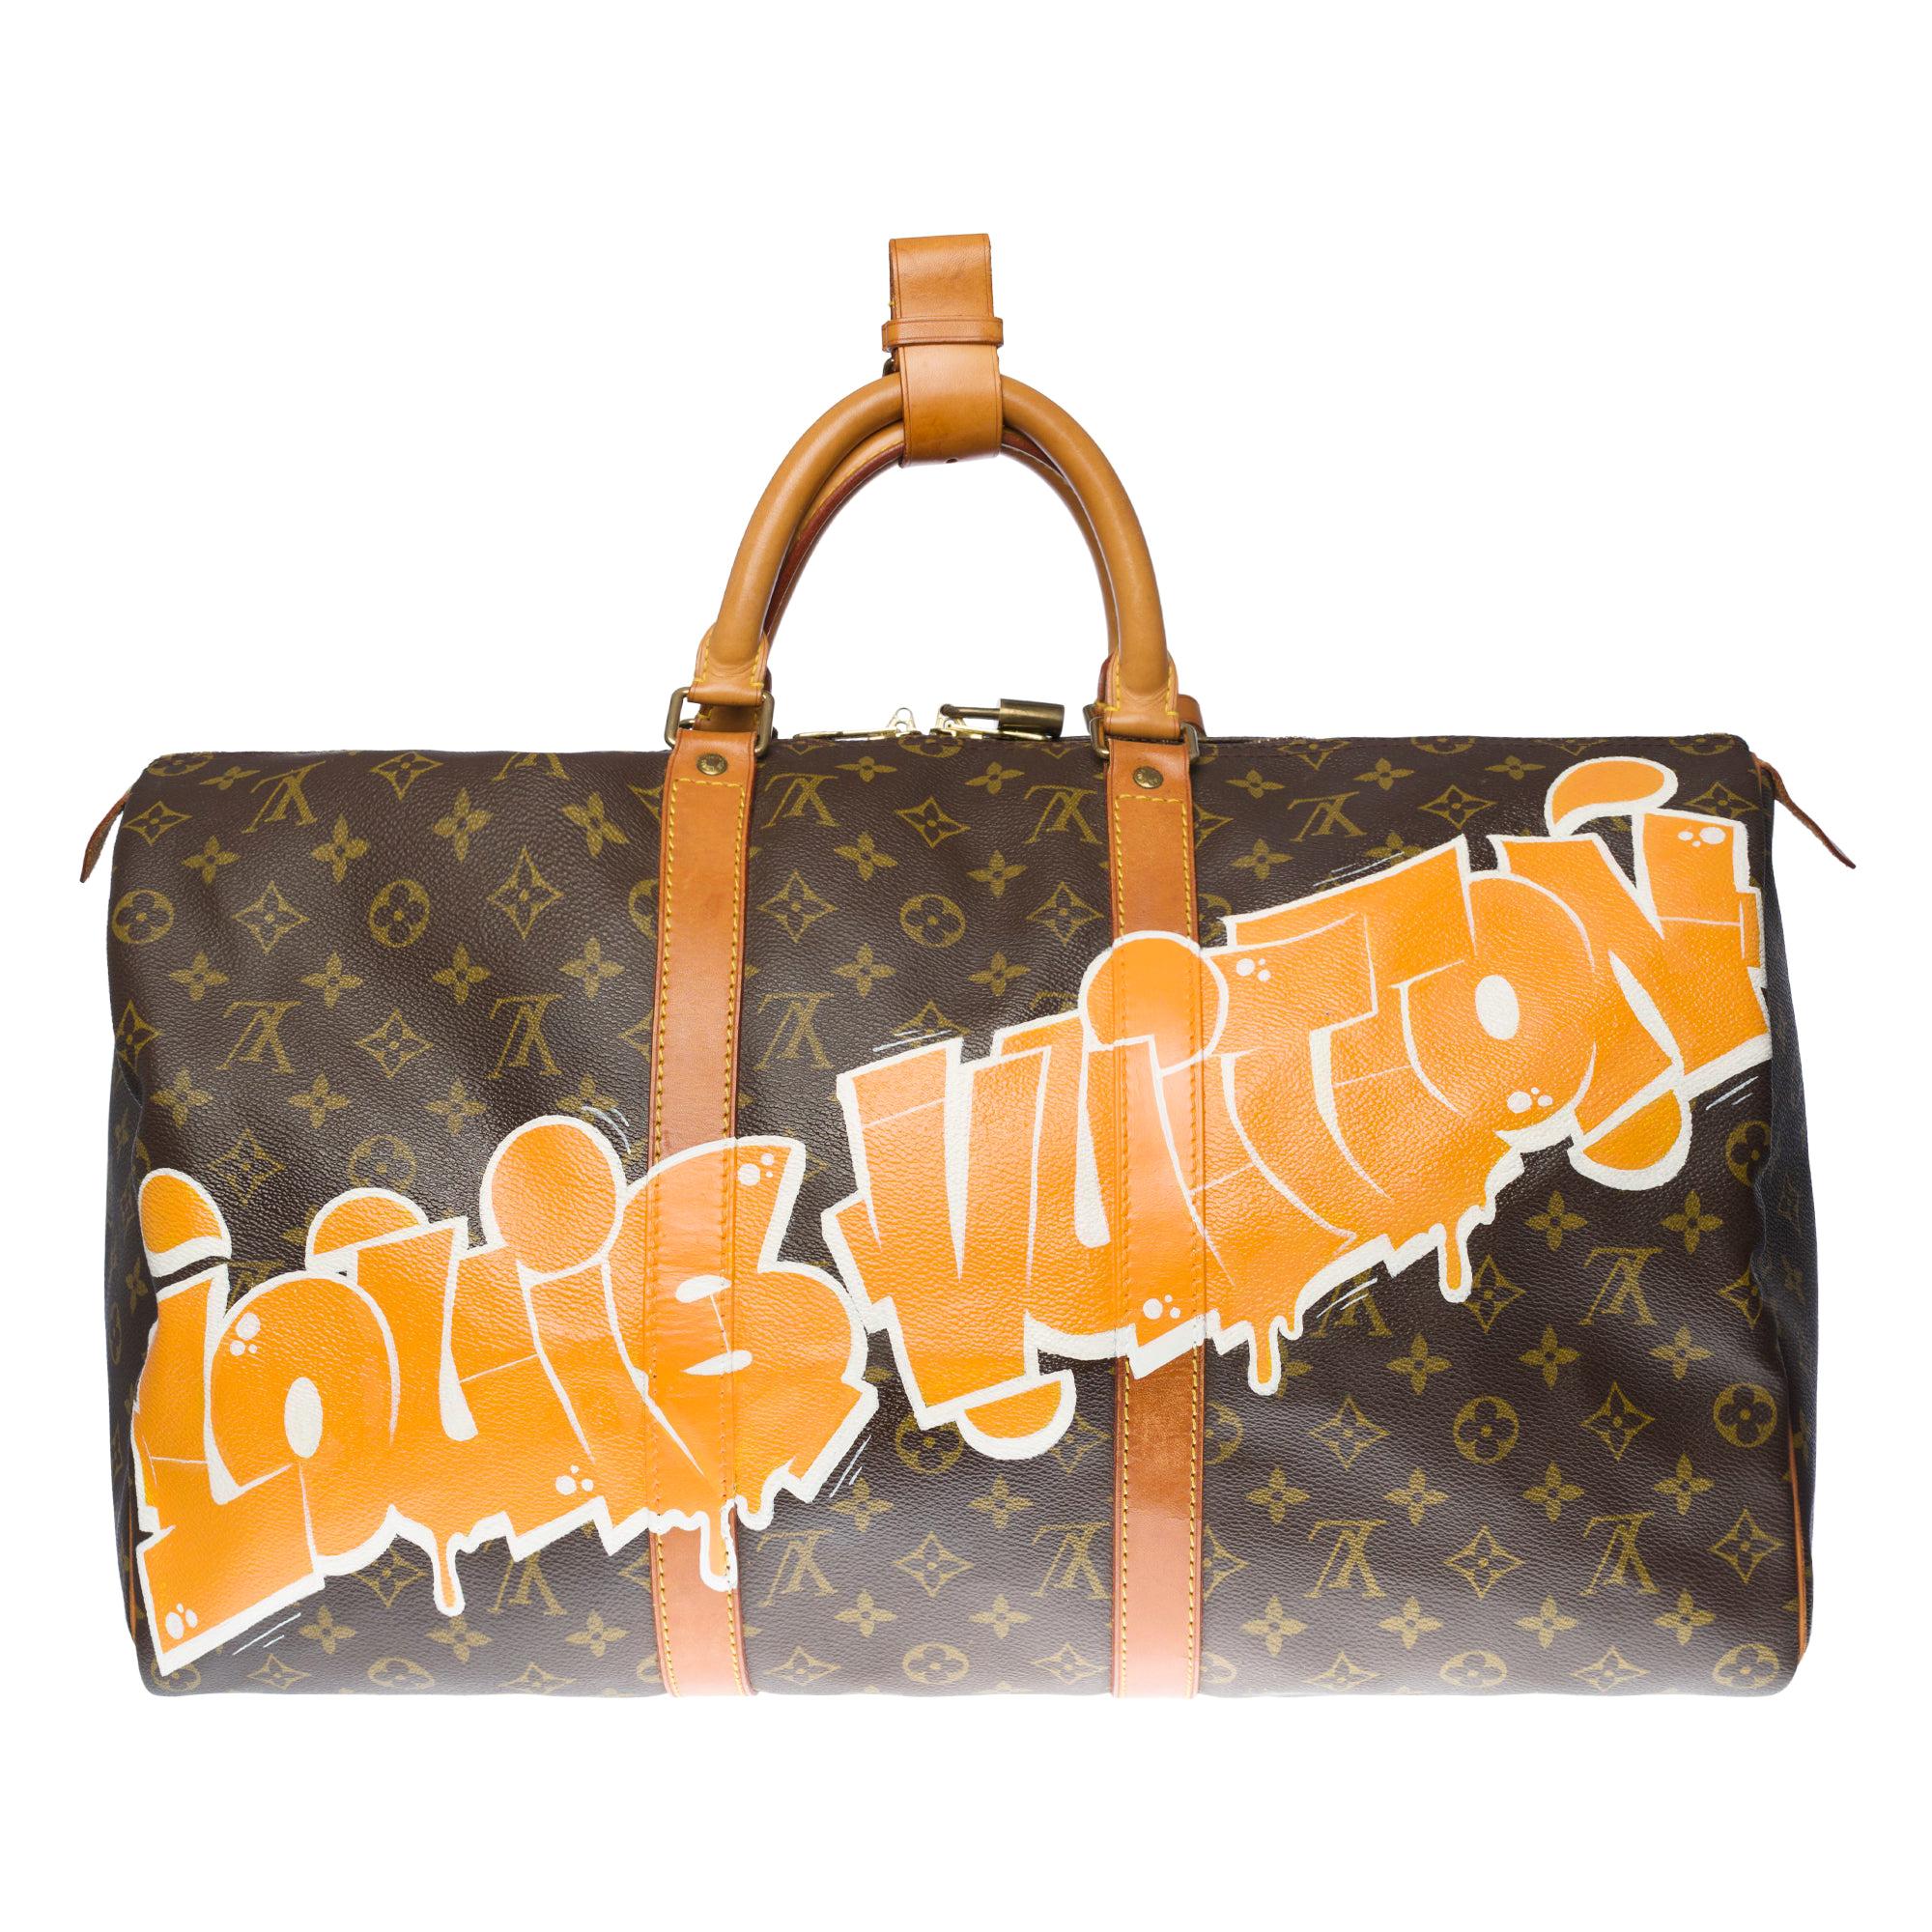 Customized "" Louis Vuitton Good Vibes" Keepall 50 Travel bag in brown canvas